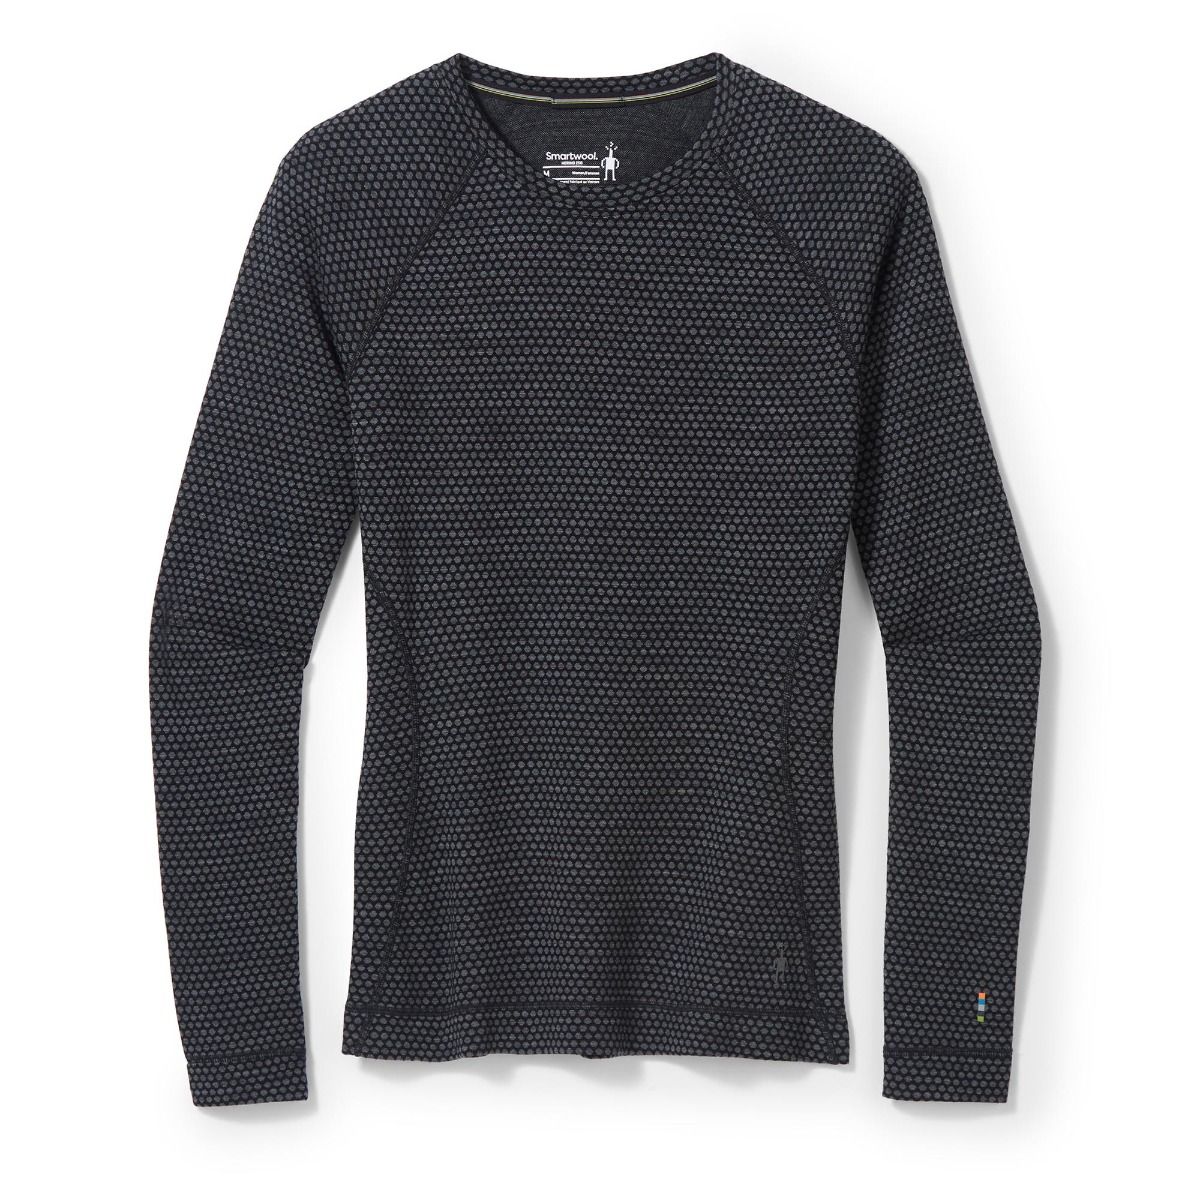 Mn Merino 250 Baselayer Pattern Crew - The Benchmark Outdoor Outfitters